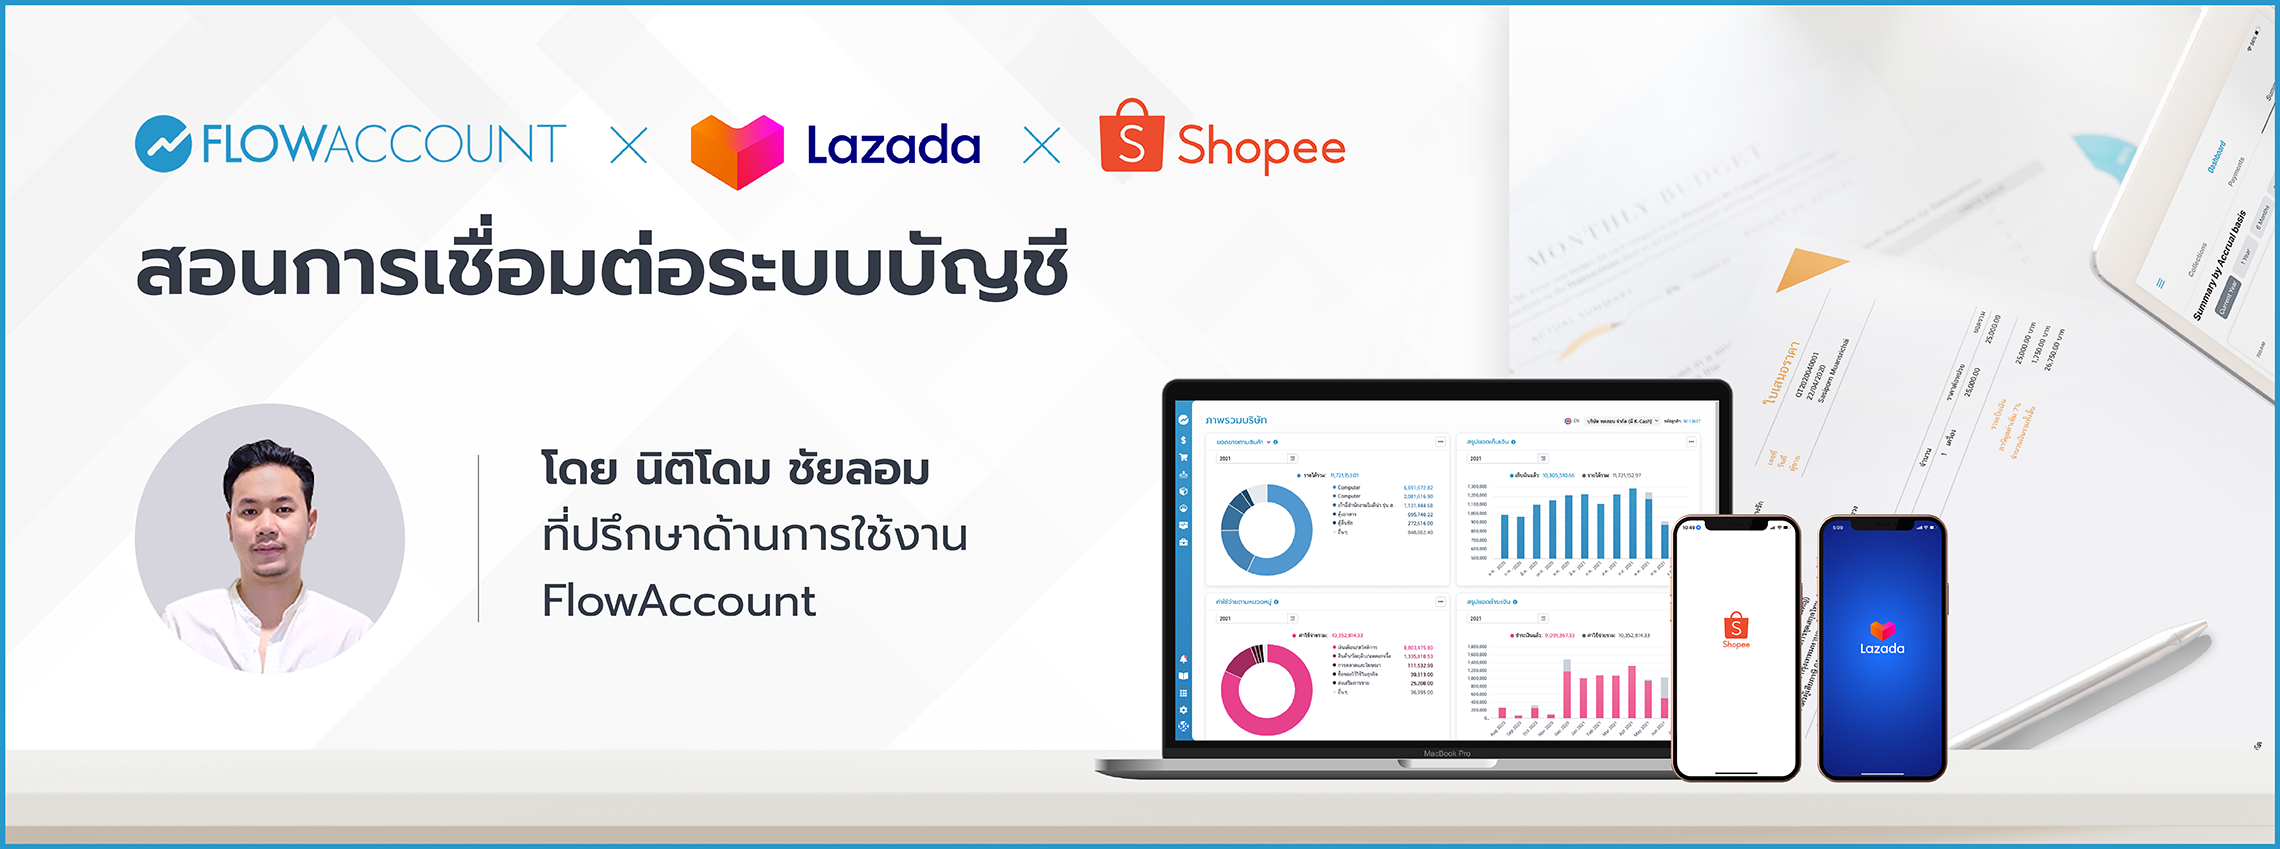 FlowAccount Business Suite for Shopee & Lazada